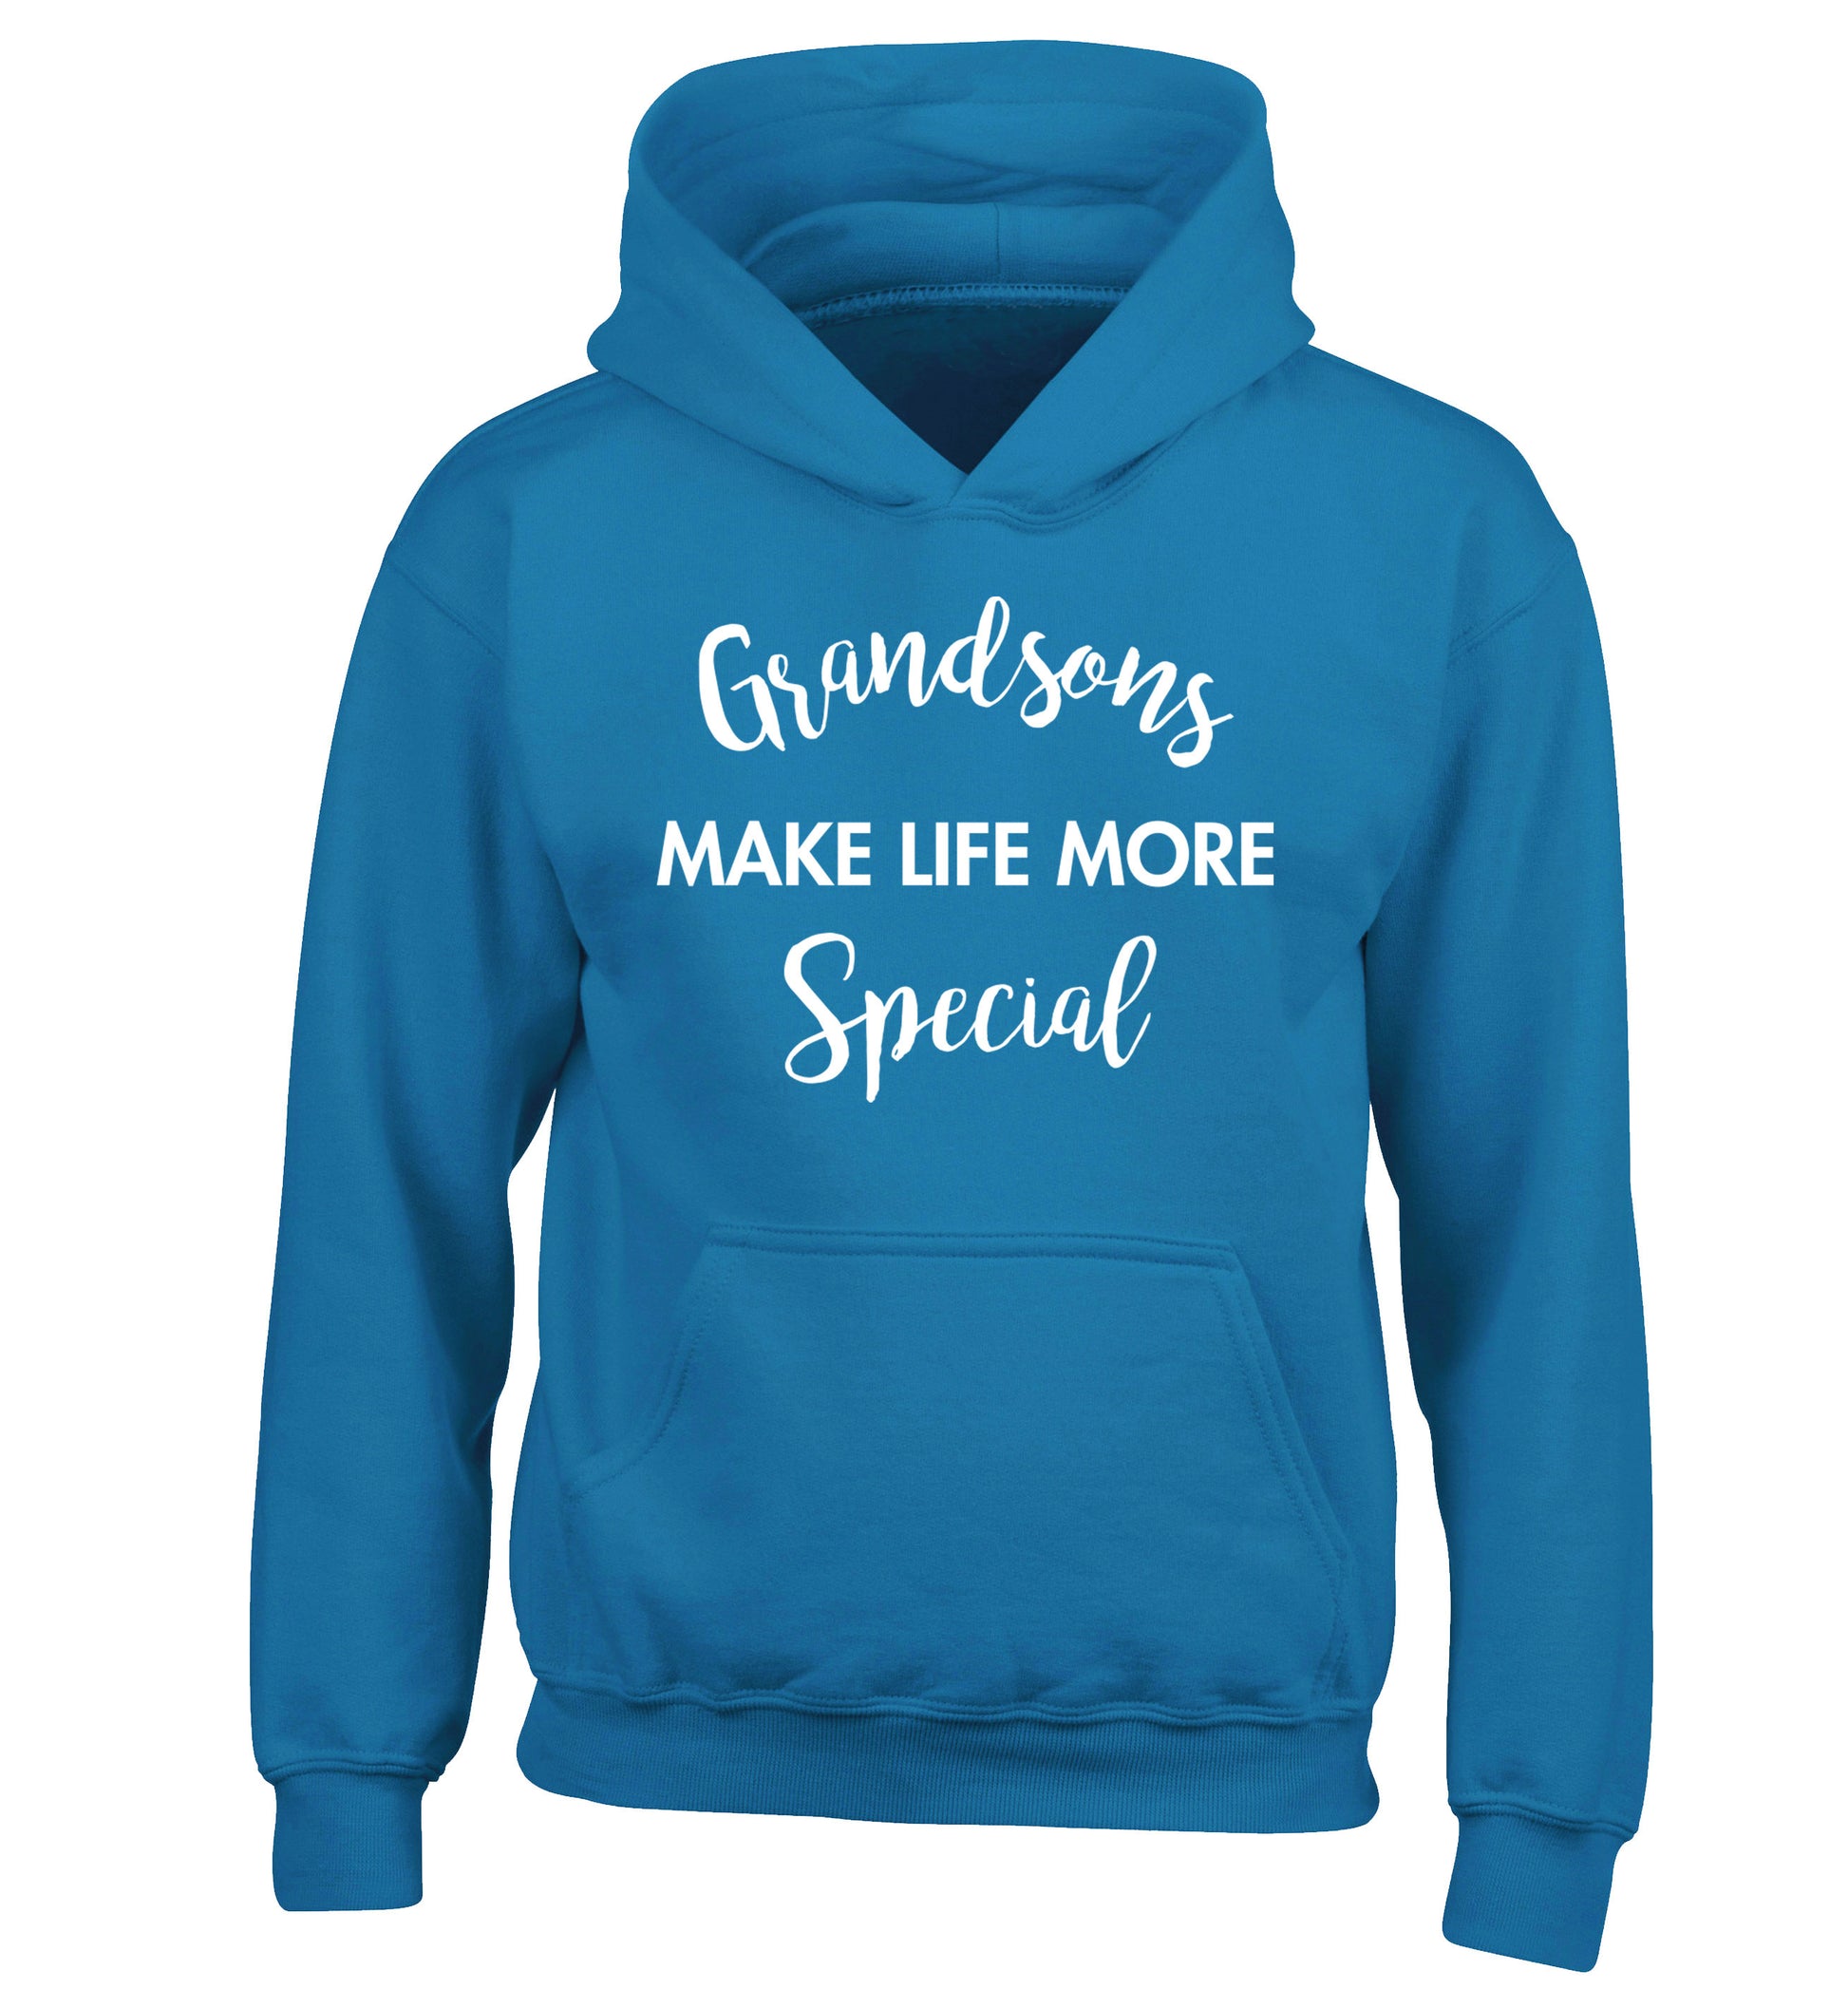 Grandsons make life more special children's blue hoodie 12-14 Years